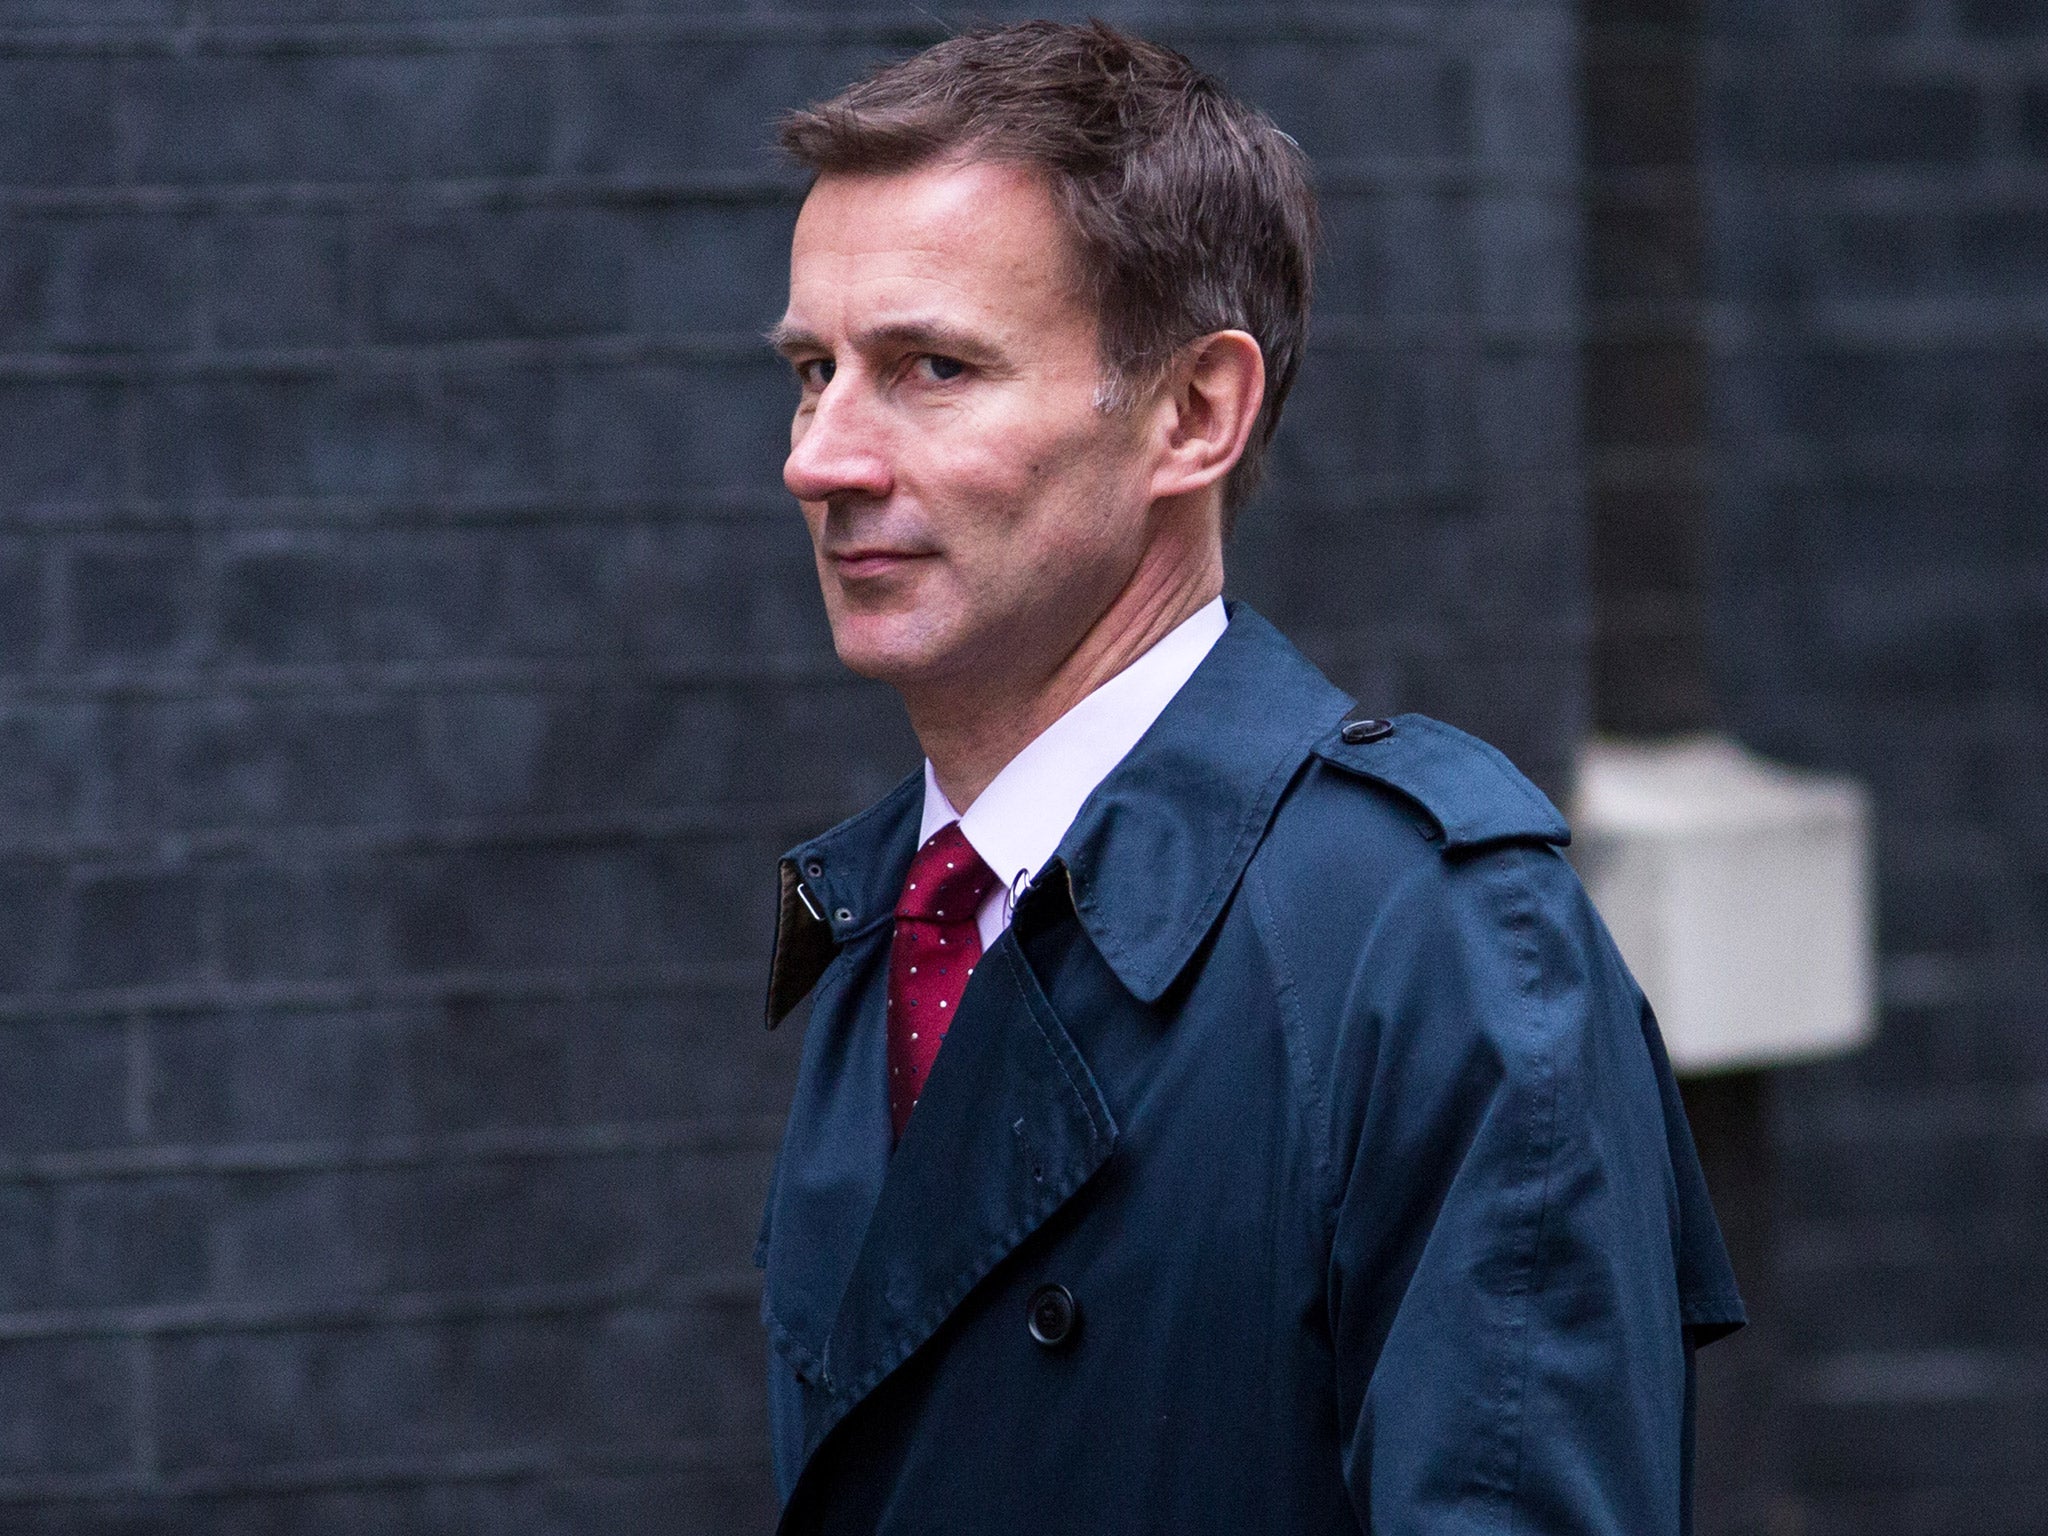 Health Secretary Jeremy Hunt has decided to impose a new contract on junior doctors with no further negotiation